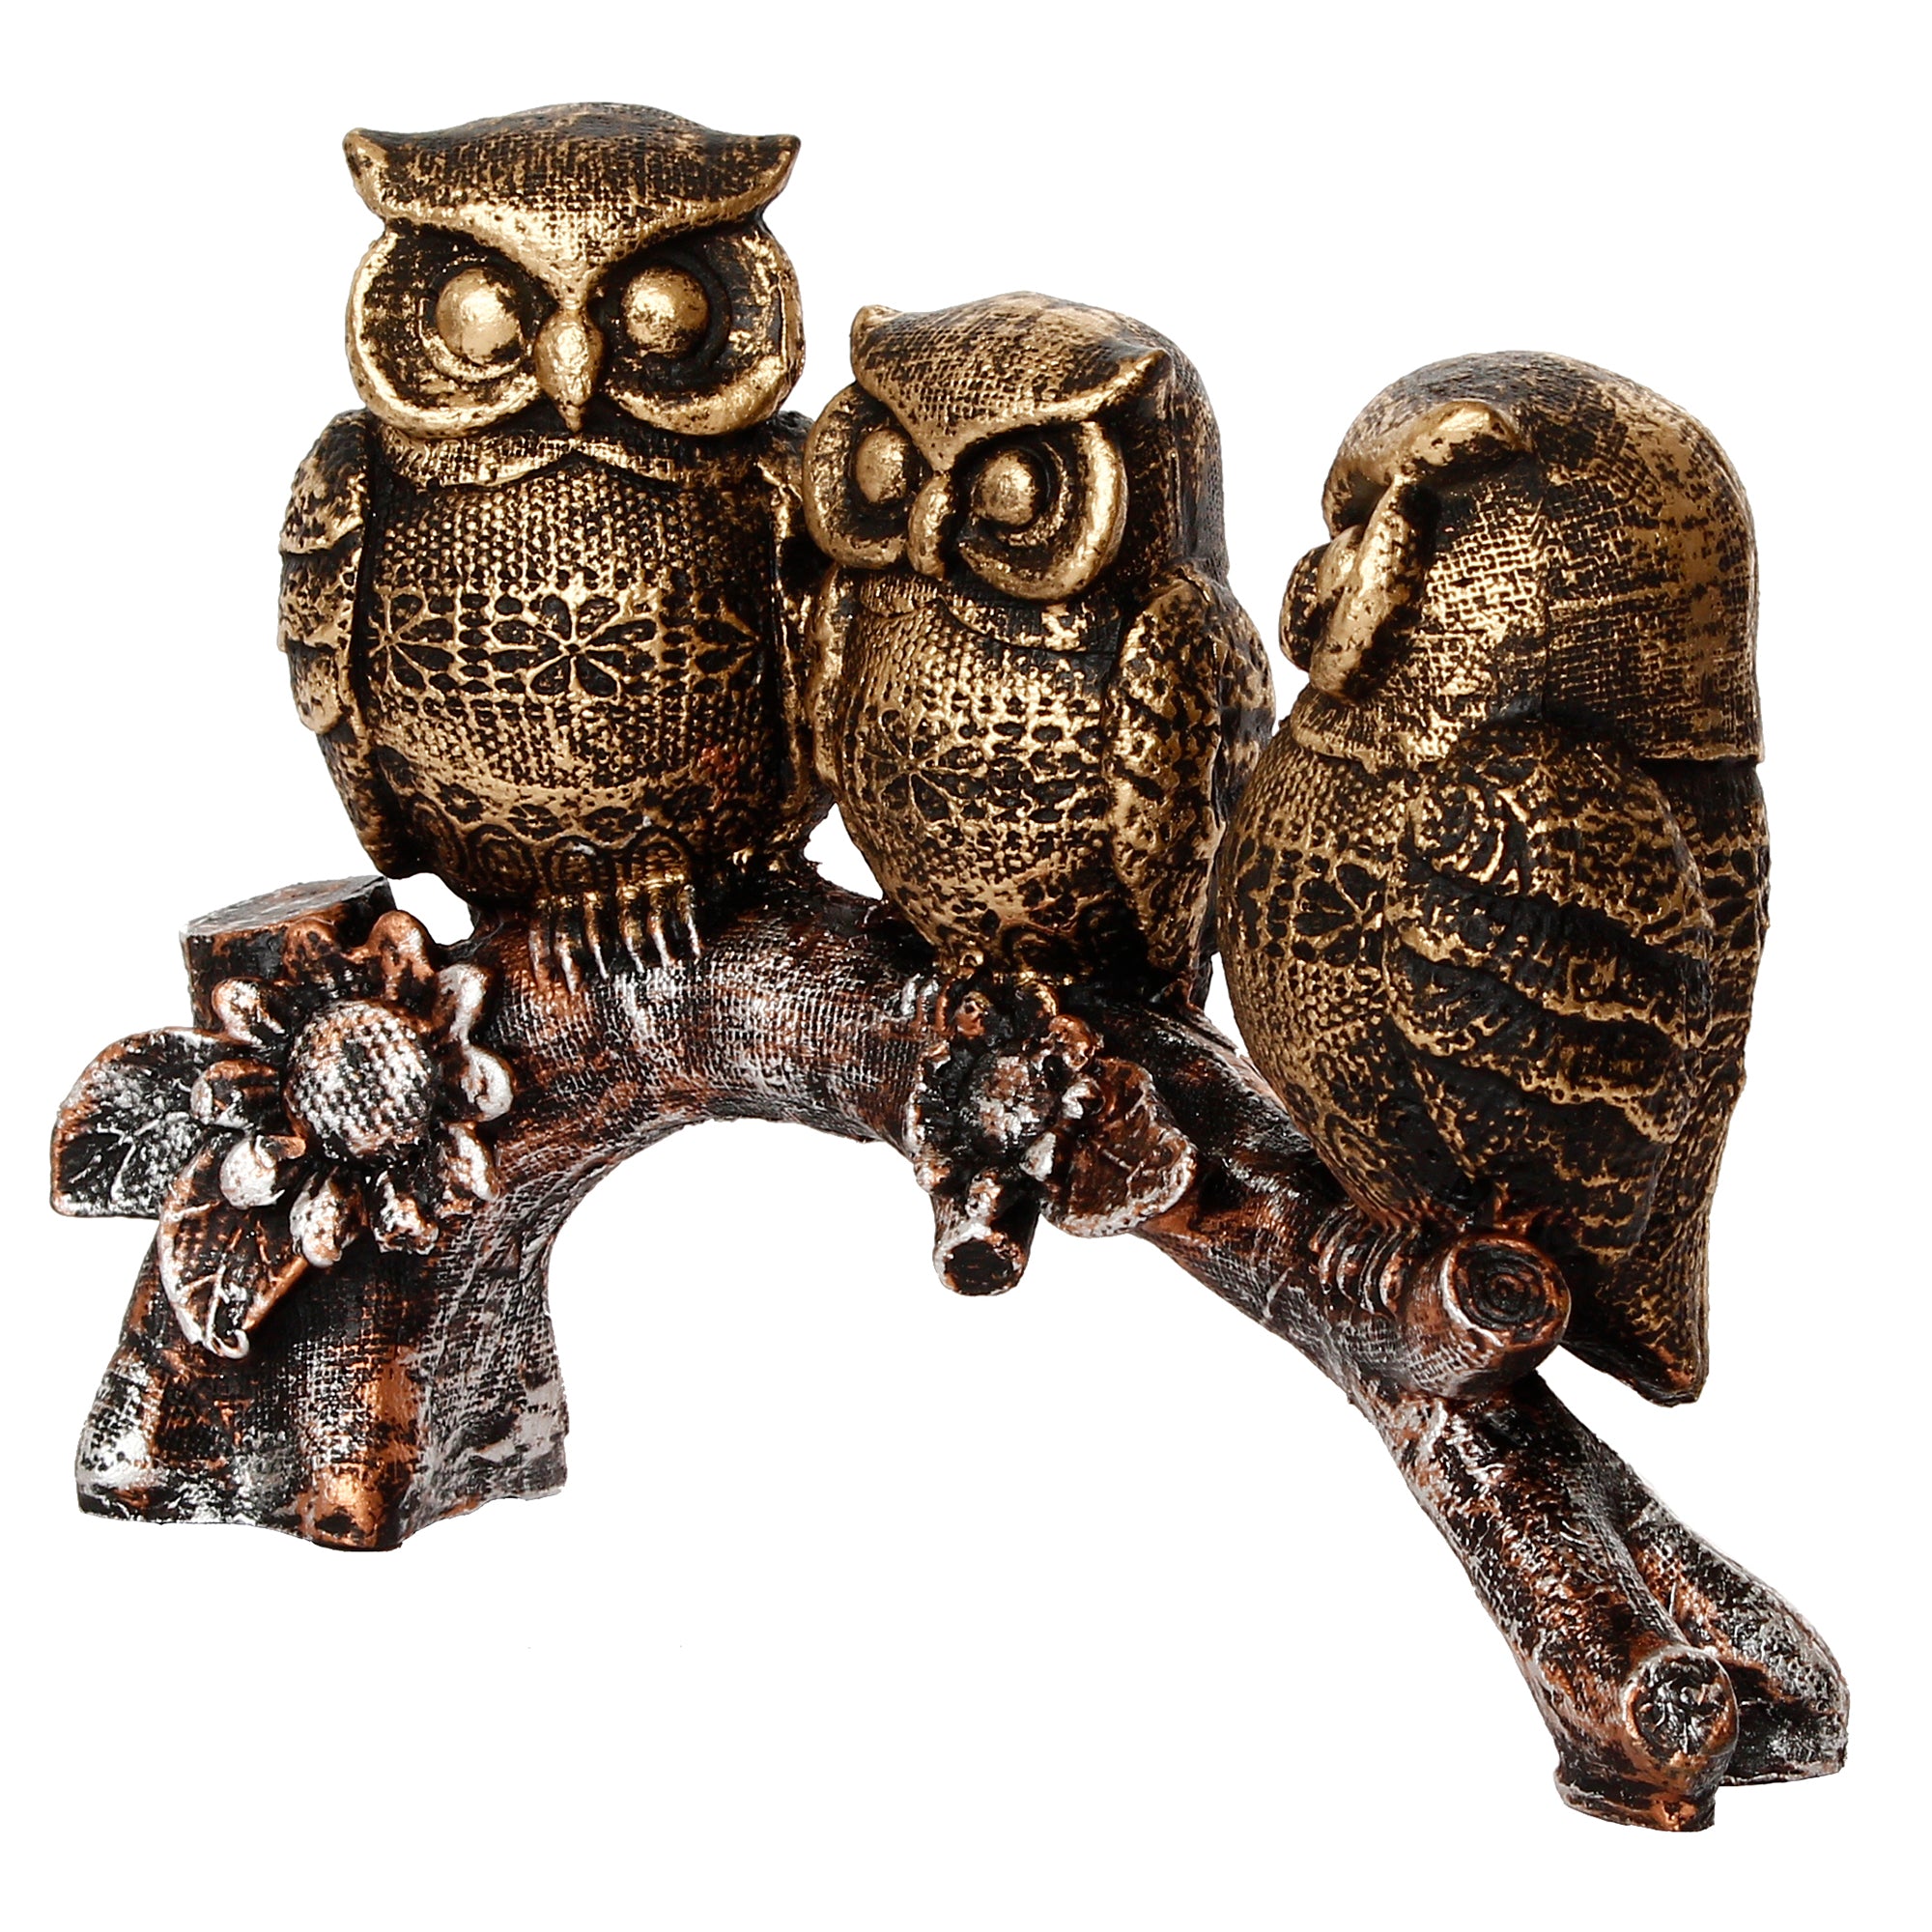 3 Owl Sitting on Branch Antique Finish Handcrafted Polyresin Decorative Showpiece 4